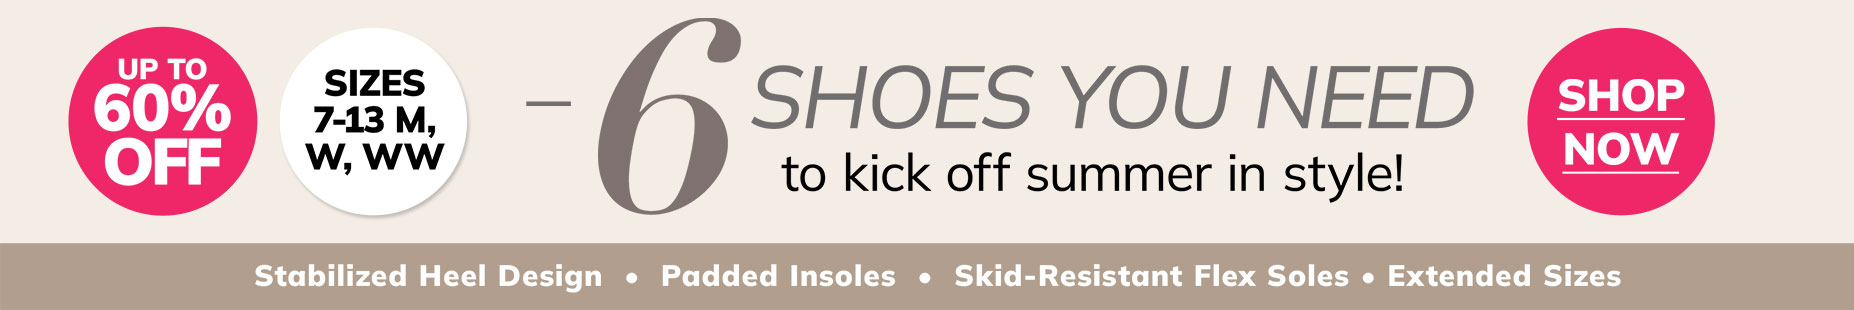 Up to 60% Off - 6 shoes you need